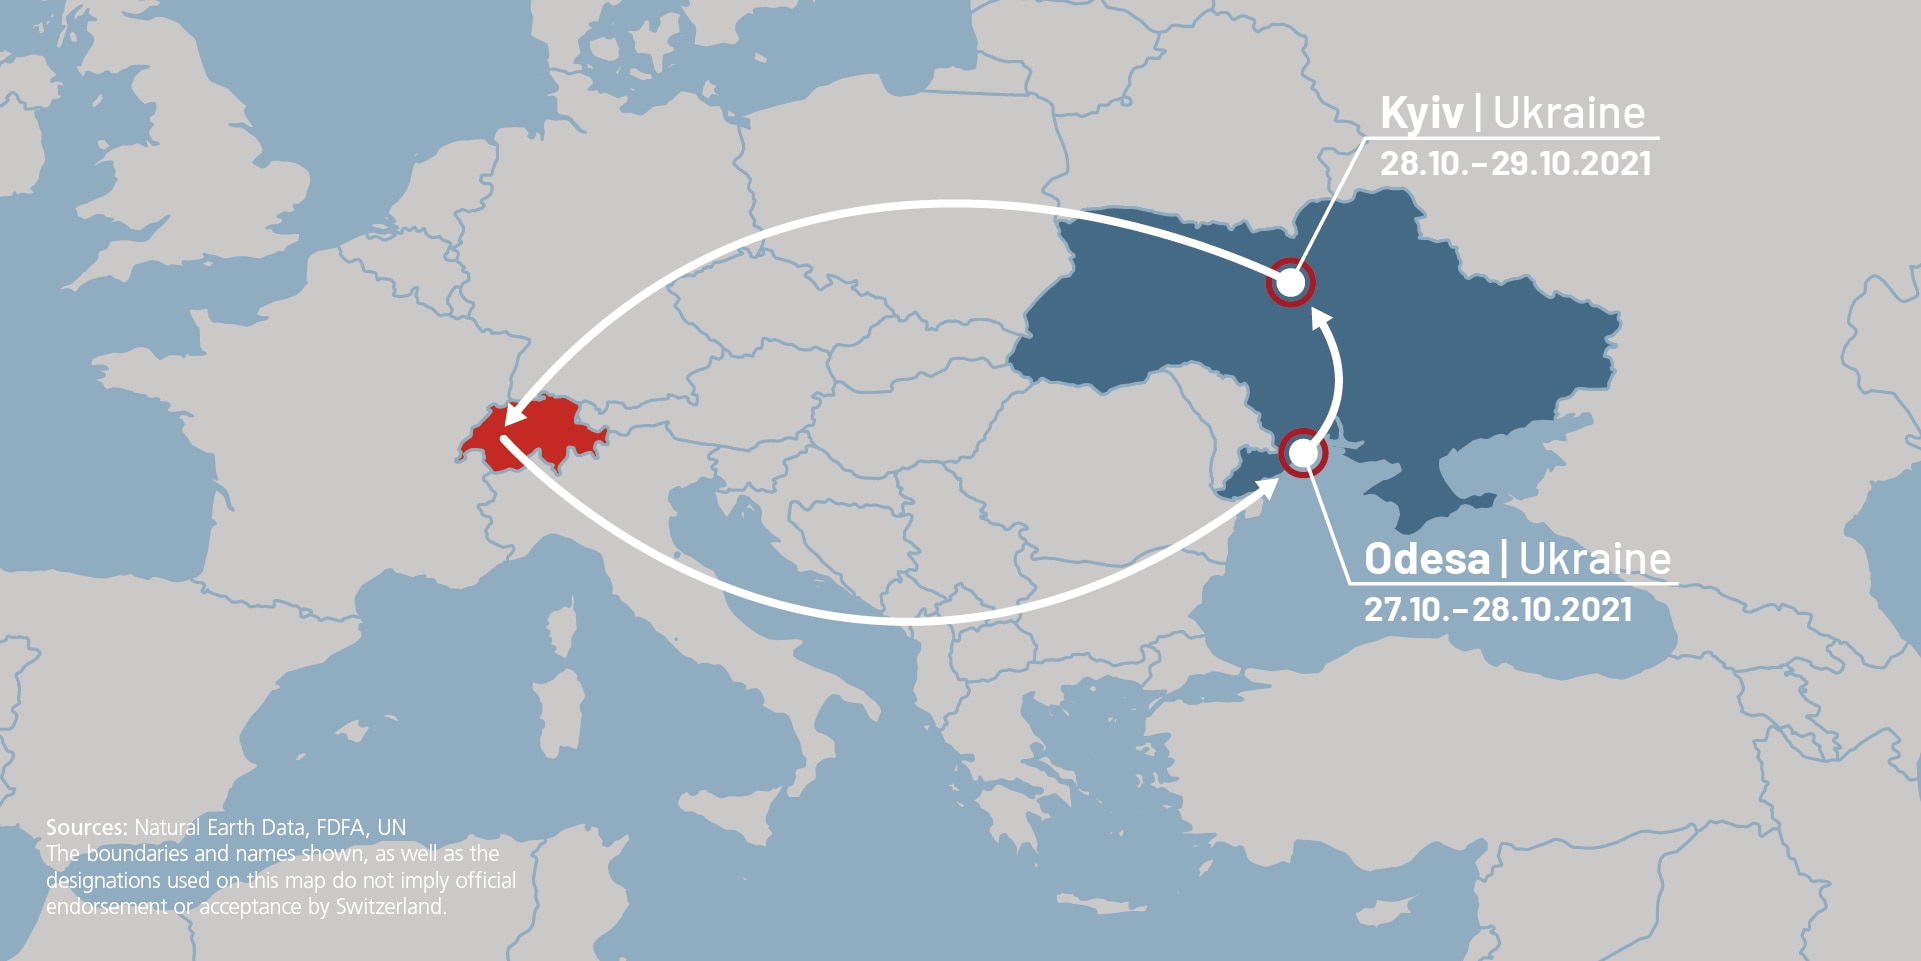 Map illustrating the stopovers of Federal Councillor Cassis' Ukrainian trip in Odesa and Kyiv.